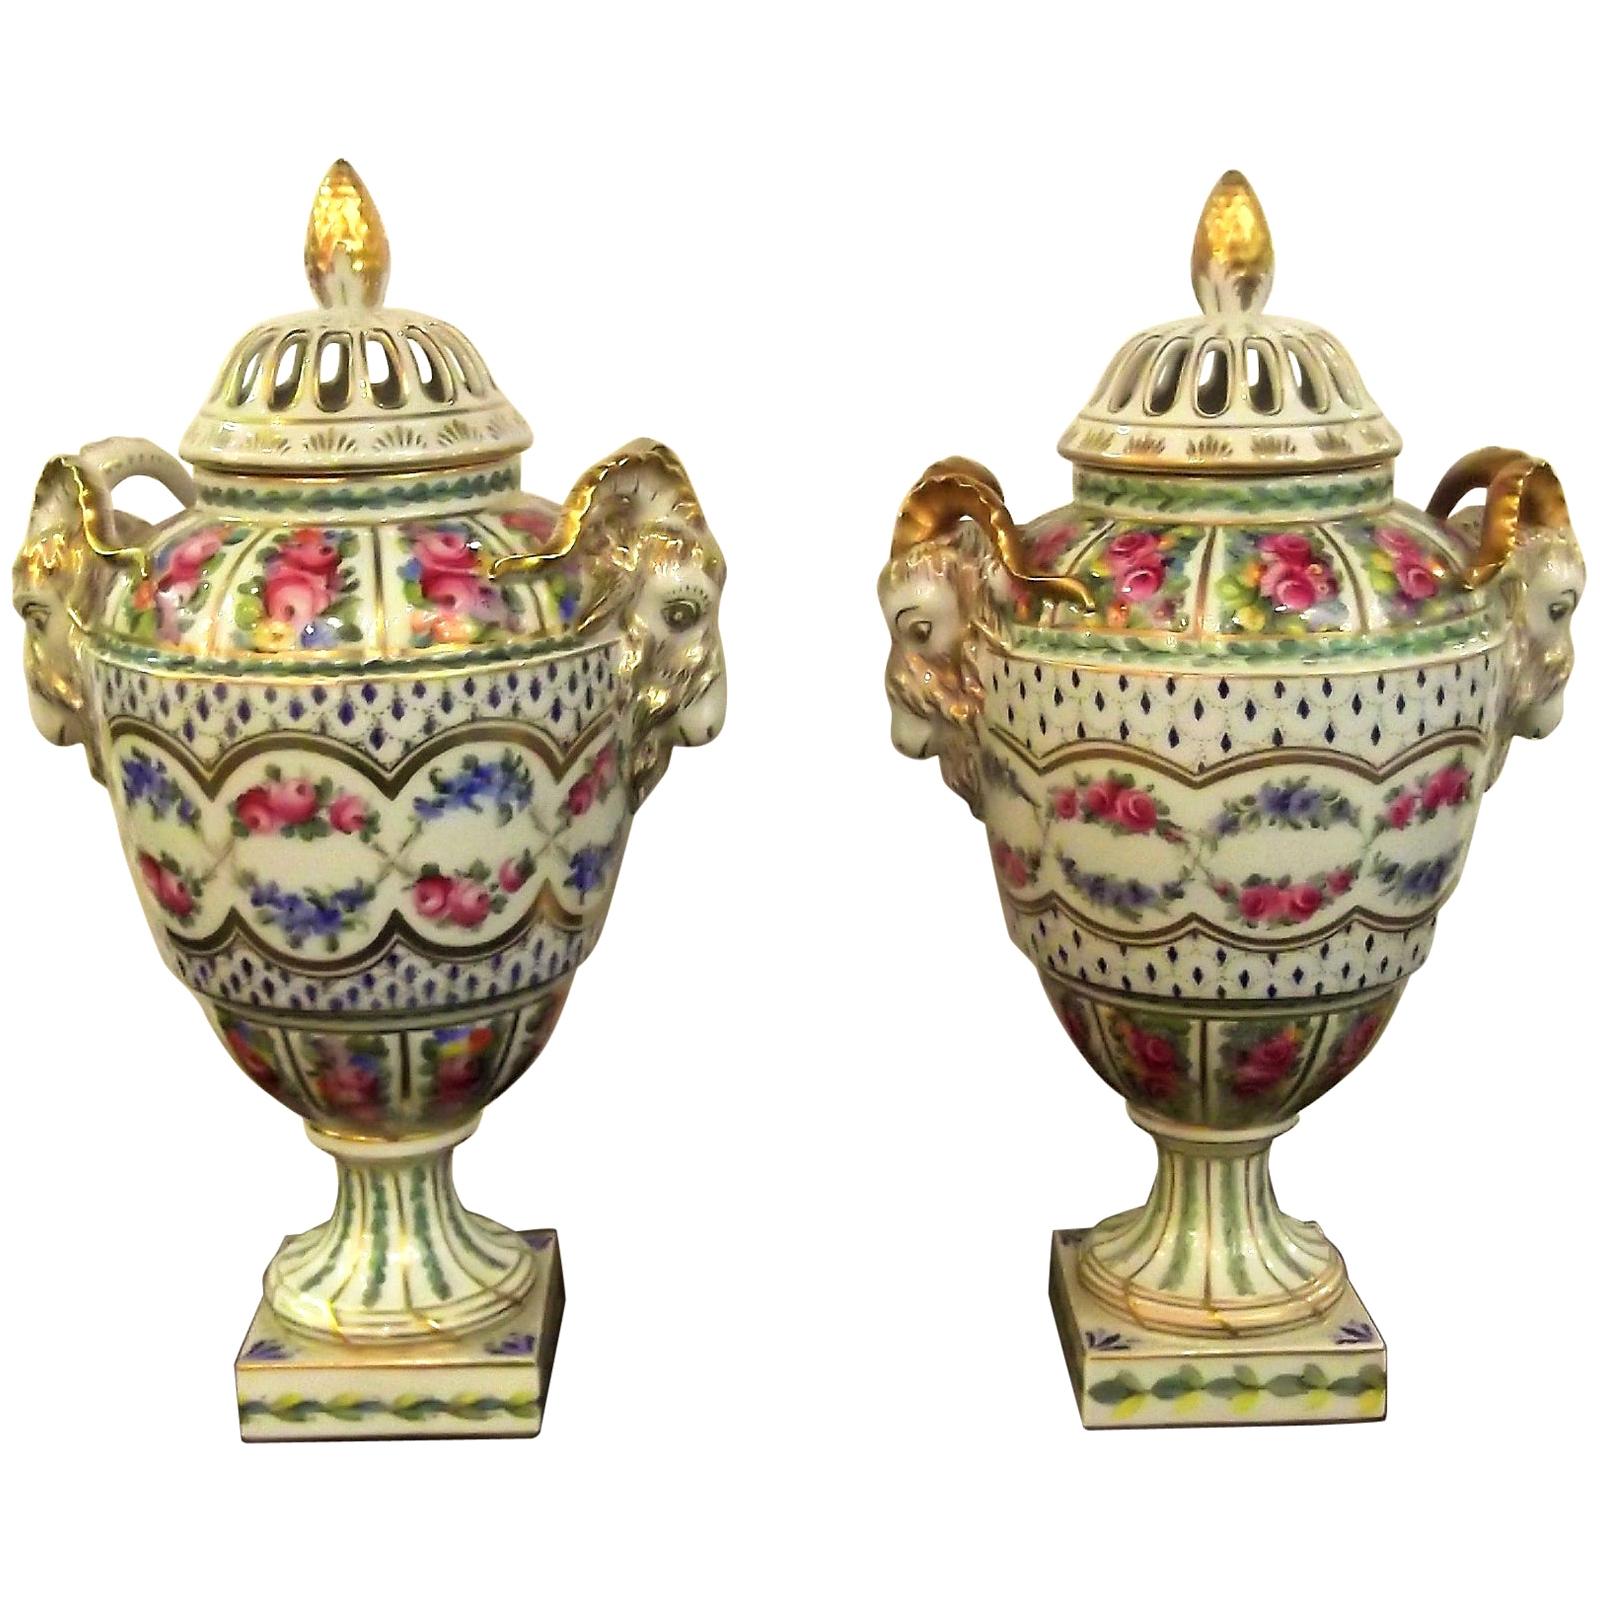 Pair of Antique Hand Painted Porcelain Dresden Urns with Lids